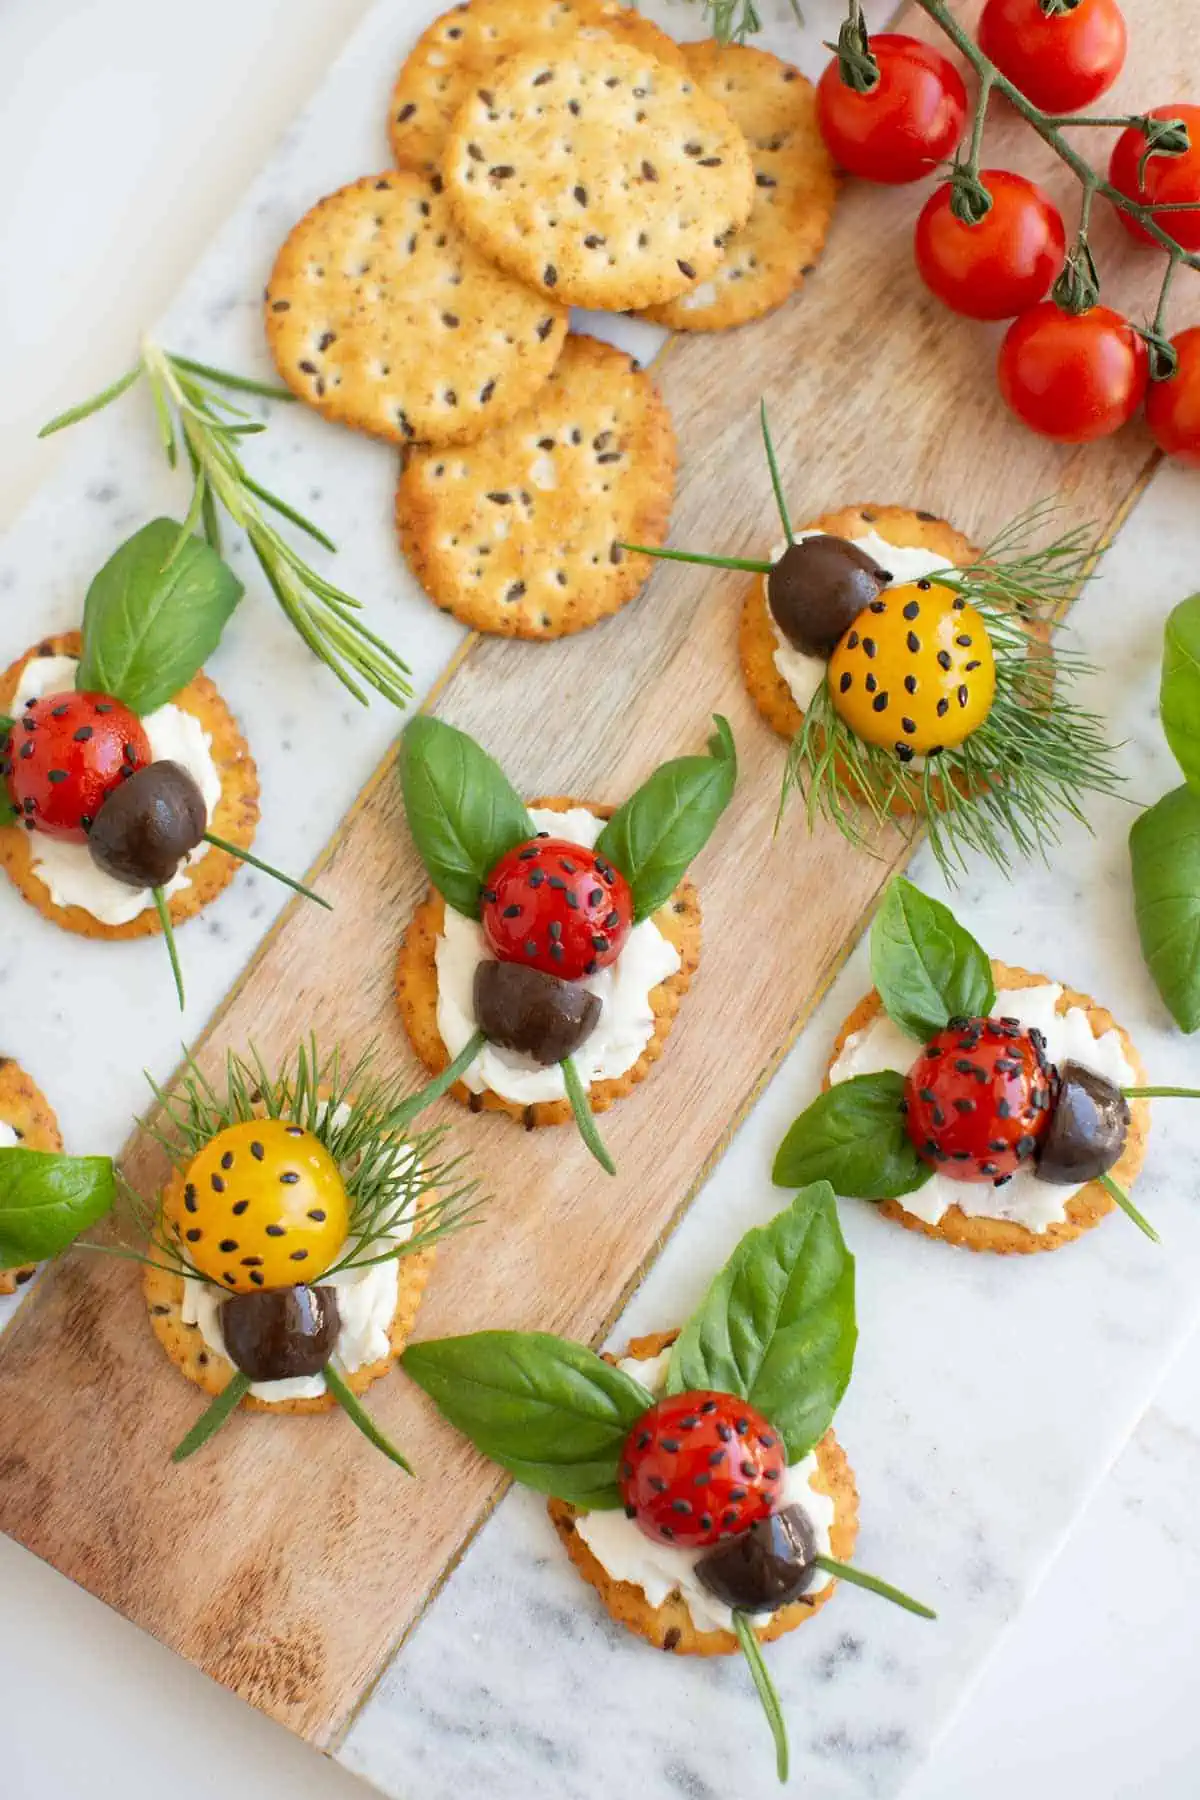 Crackers topped with cream cheese, cherry tomatoes, black olives, basil, and chives to look like ladybugs.